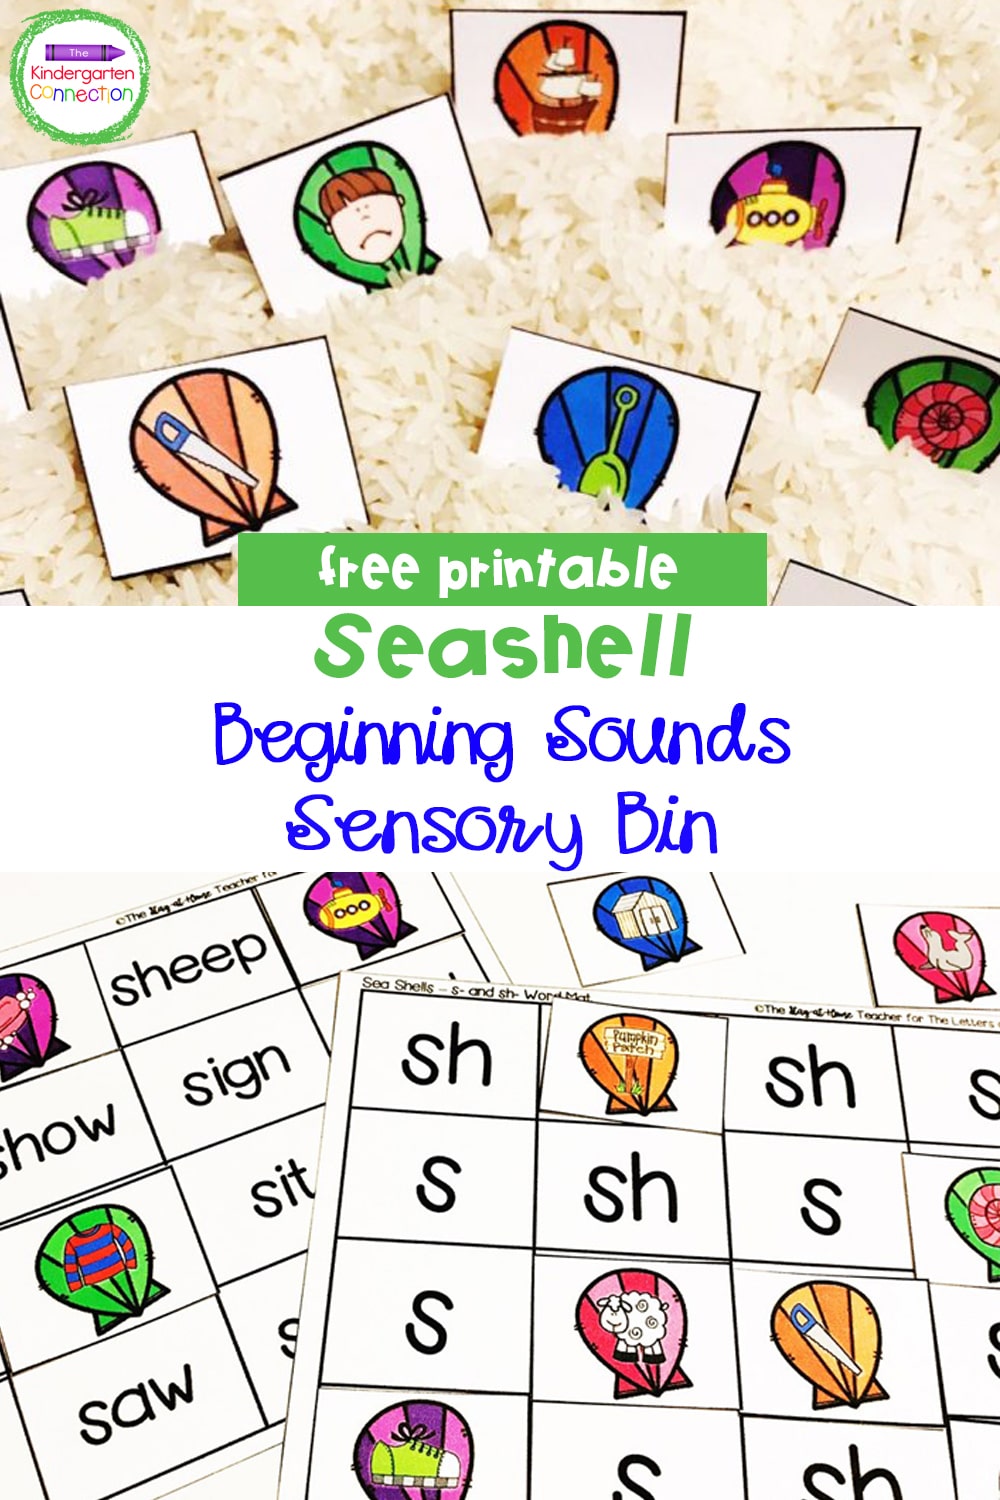 Grab this free Seashell Beginning Sounds Sensory Bin and Printables and add a fun summer theme to your Kindergarten literacy centers!